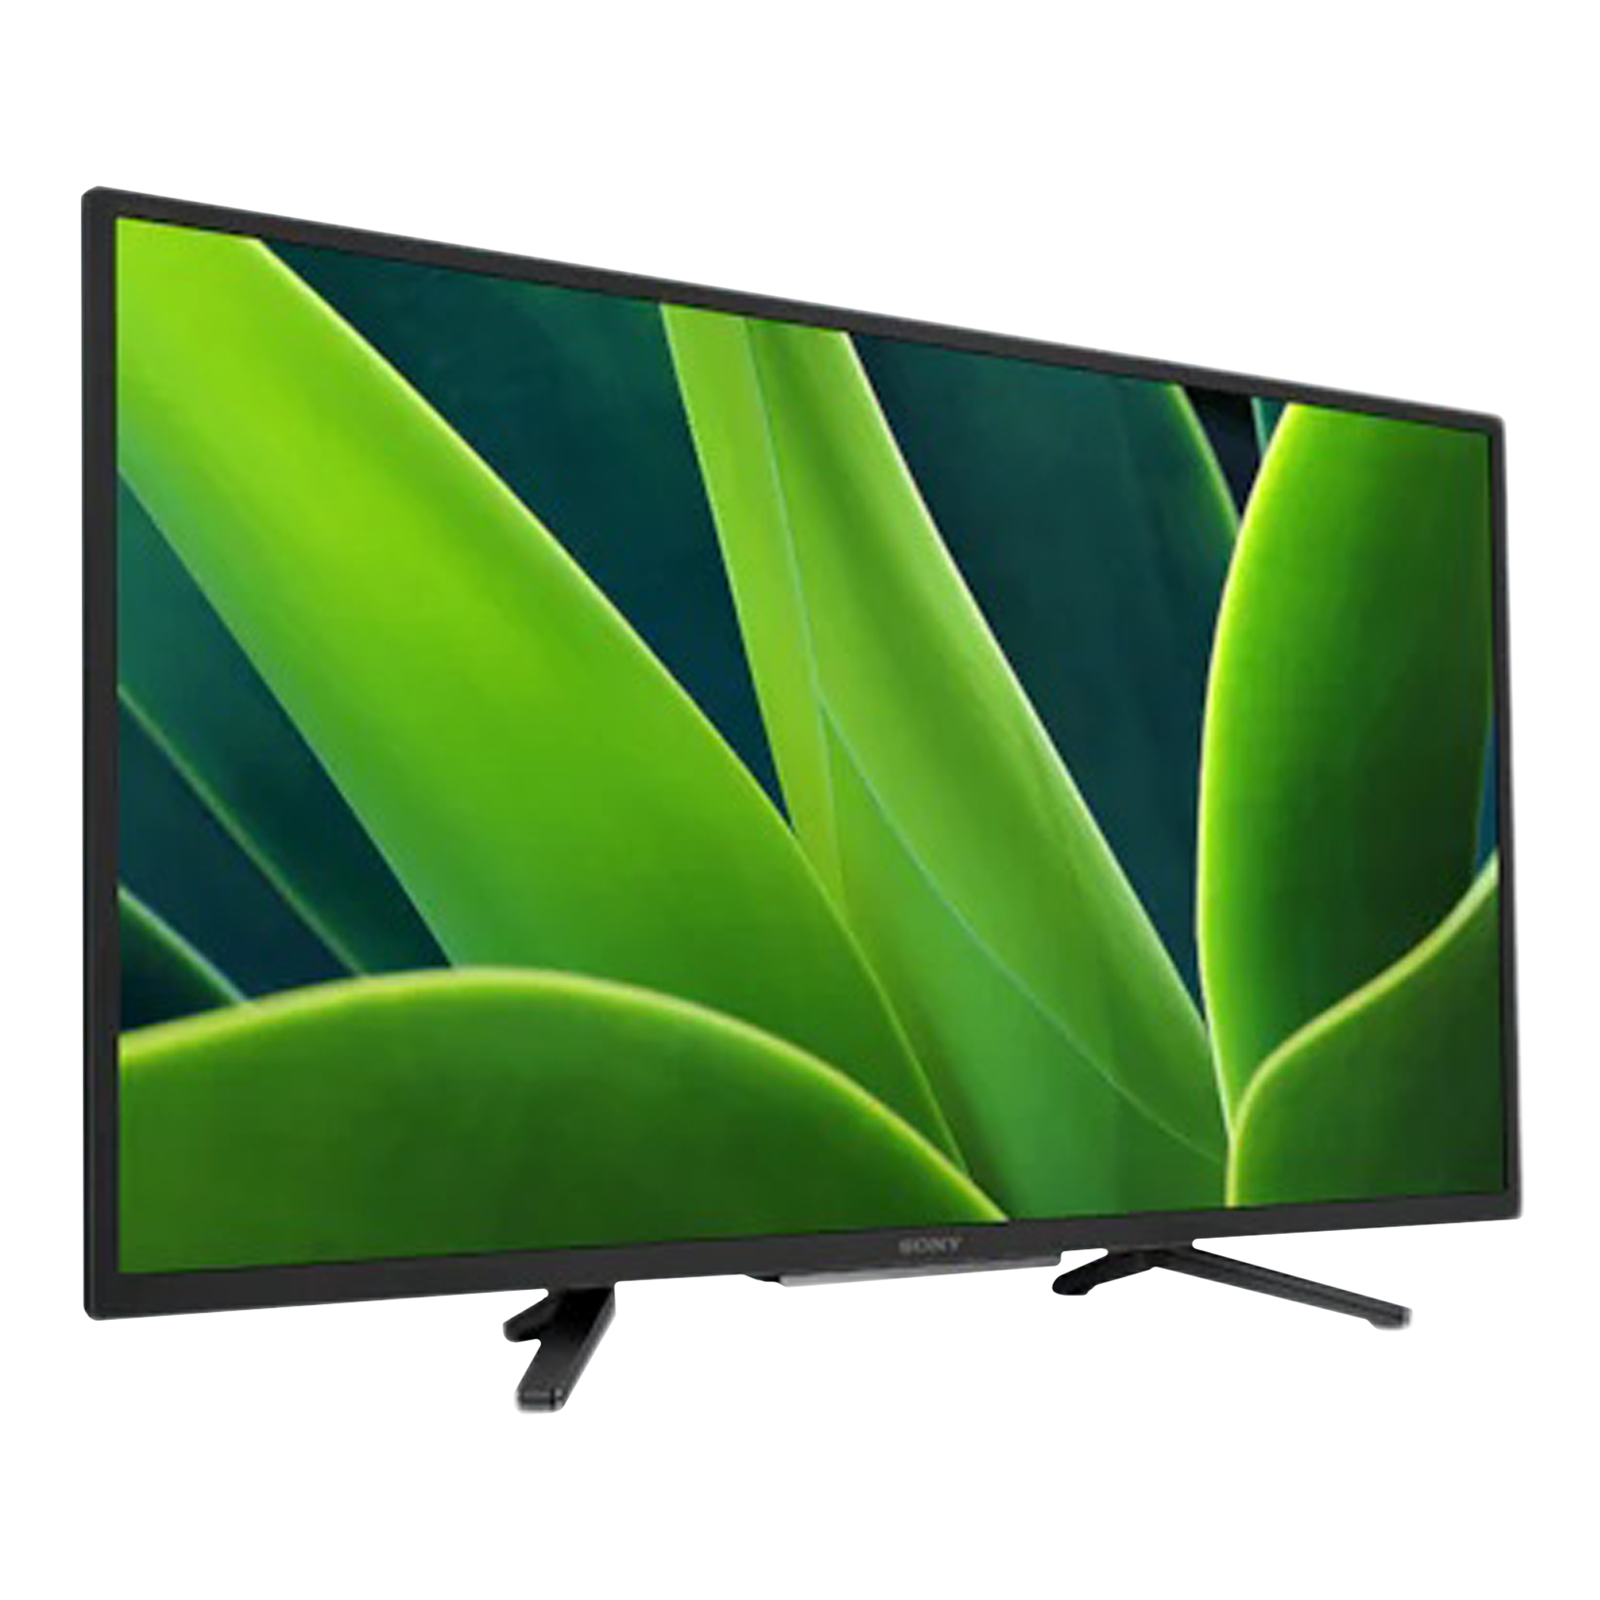 Buy Sony Bravia W830k 80 Cm 32 Inch Hd Ready Led Smart Android Tv With Alexa Compatibility 2117